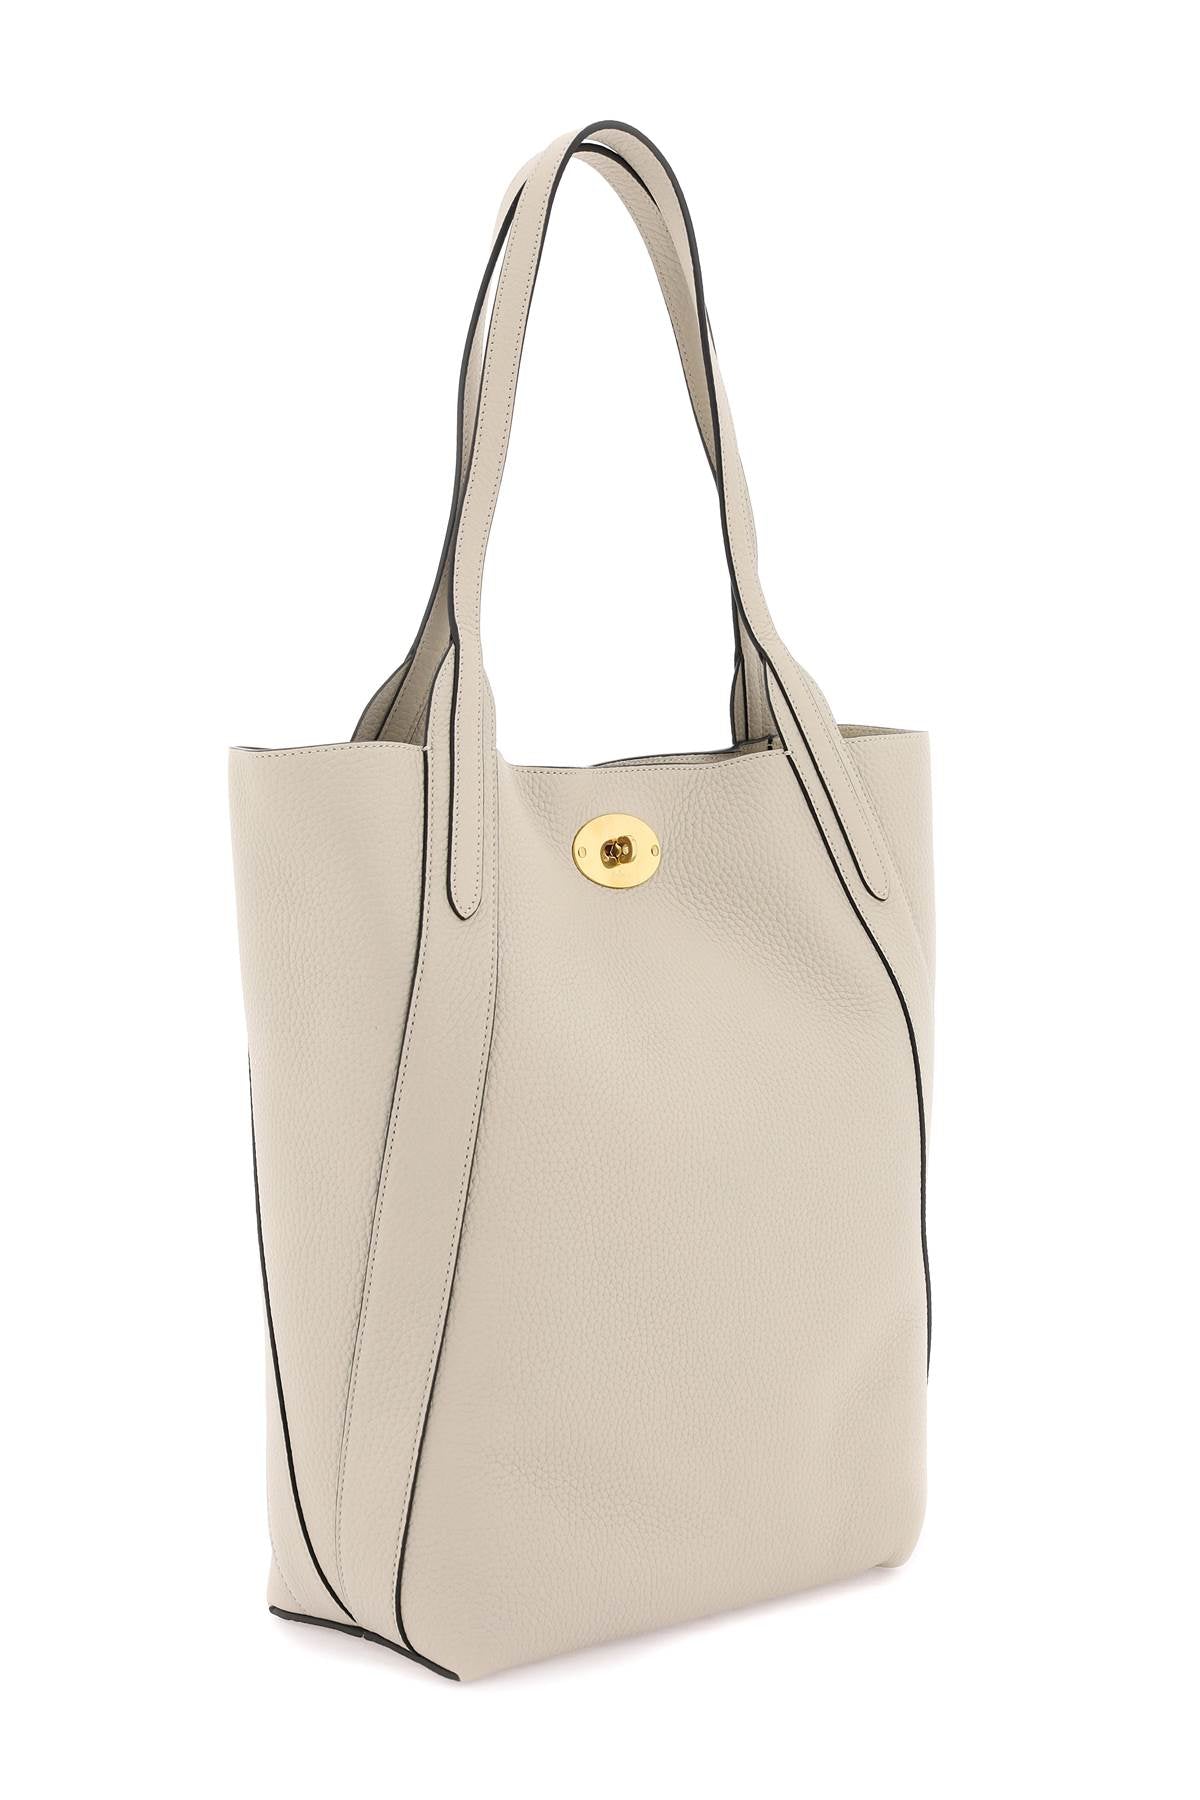 Shop Mulberry Grained Leather Bayswater Tote Handbag For Women In Grey